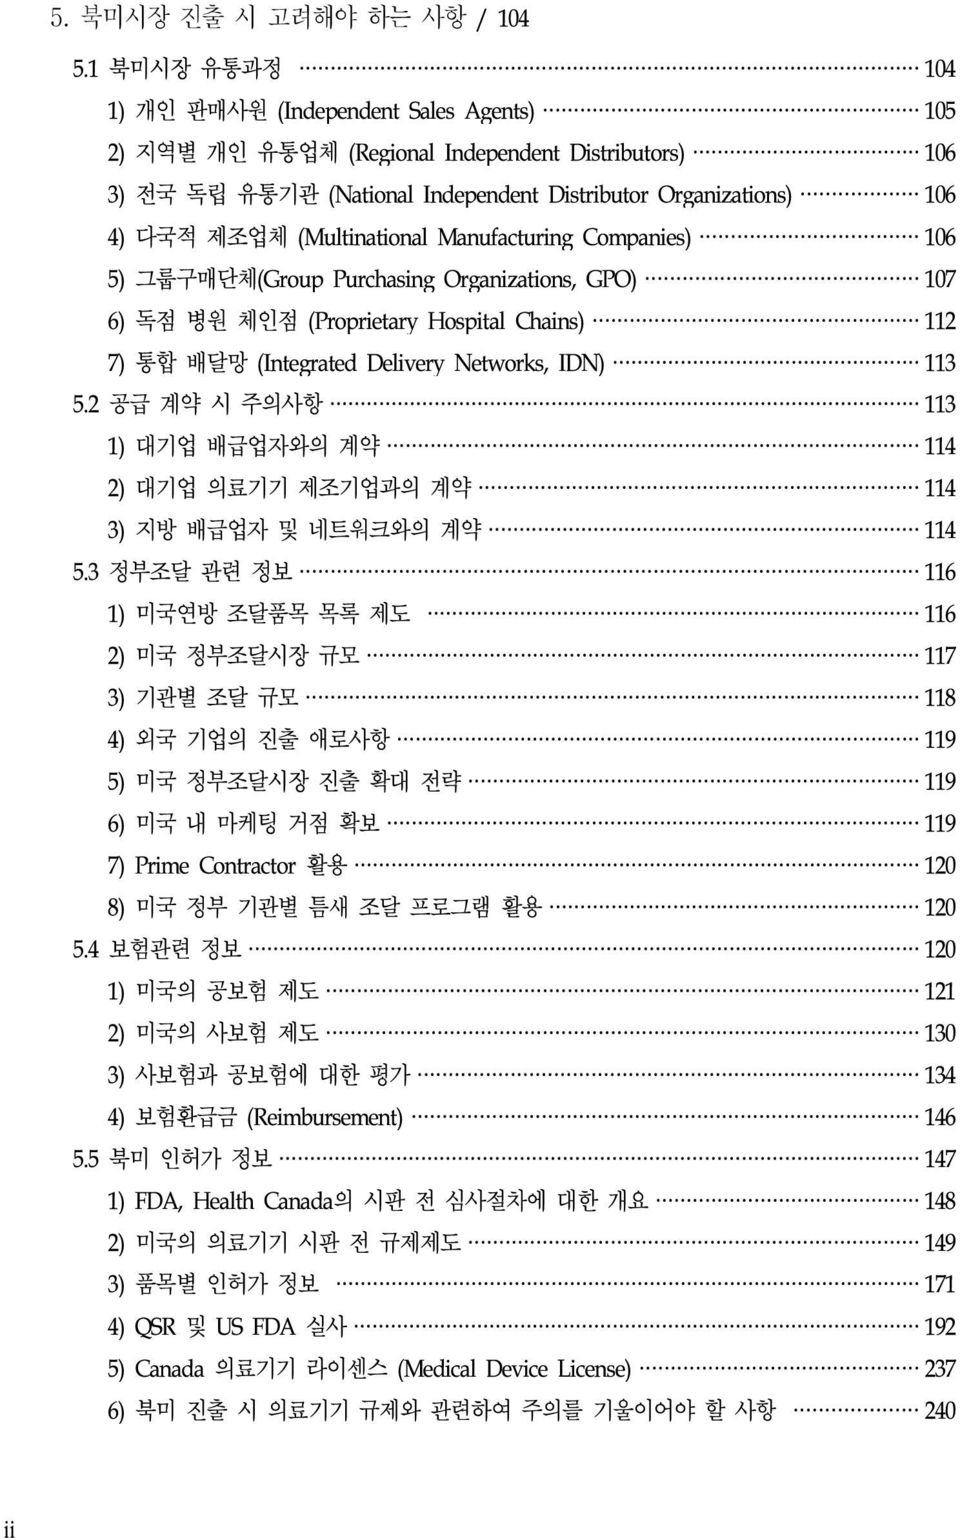 (Multinational Manufacturing Companies) 106 5) 그룹구매단체(Group Purchasing Organizations, GPO) 107 6) 독점 병원 체인점 (Proprietary Hospital Chains) 112 7) 통합 배달망 (Integrated Delivery Networks, IDN) 113 5.